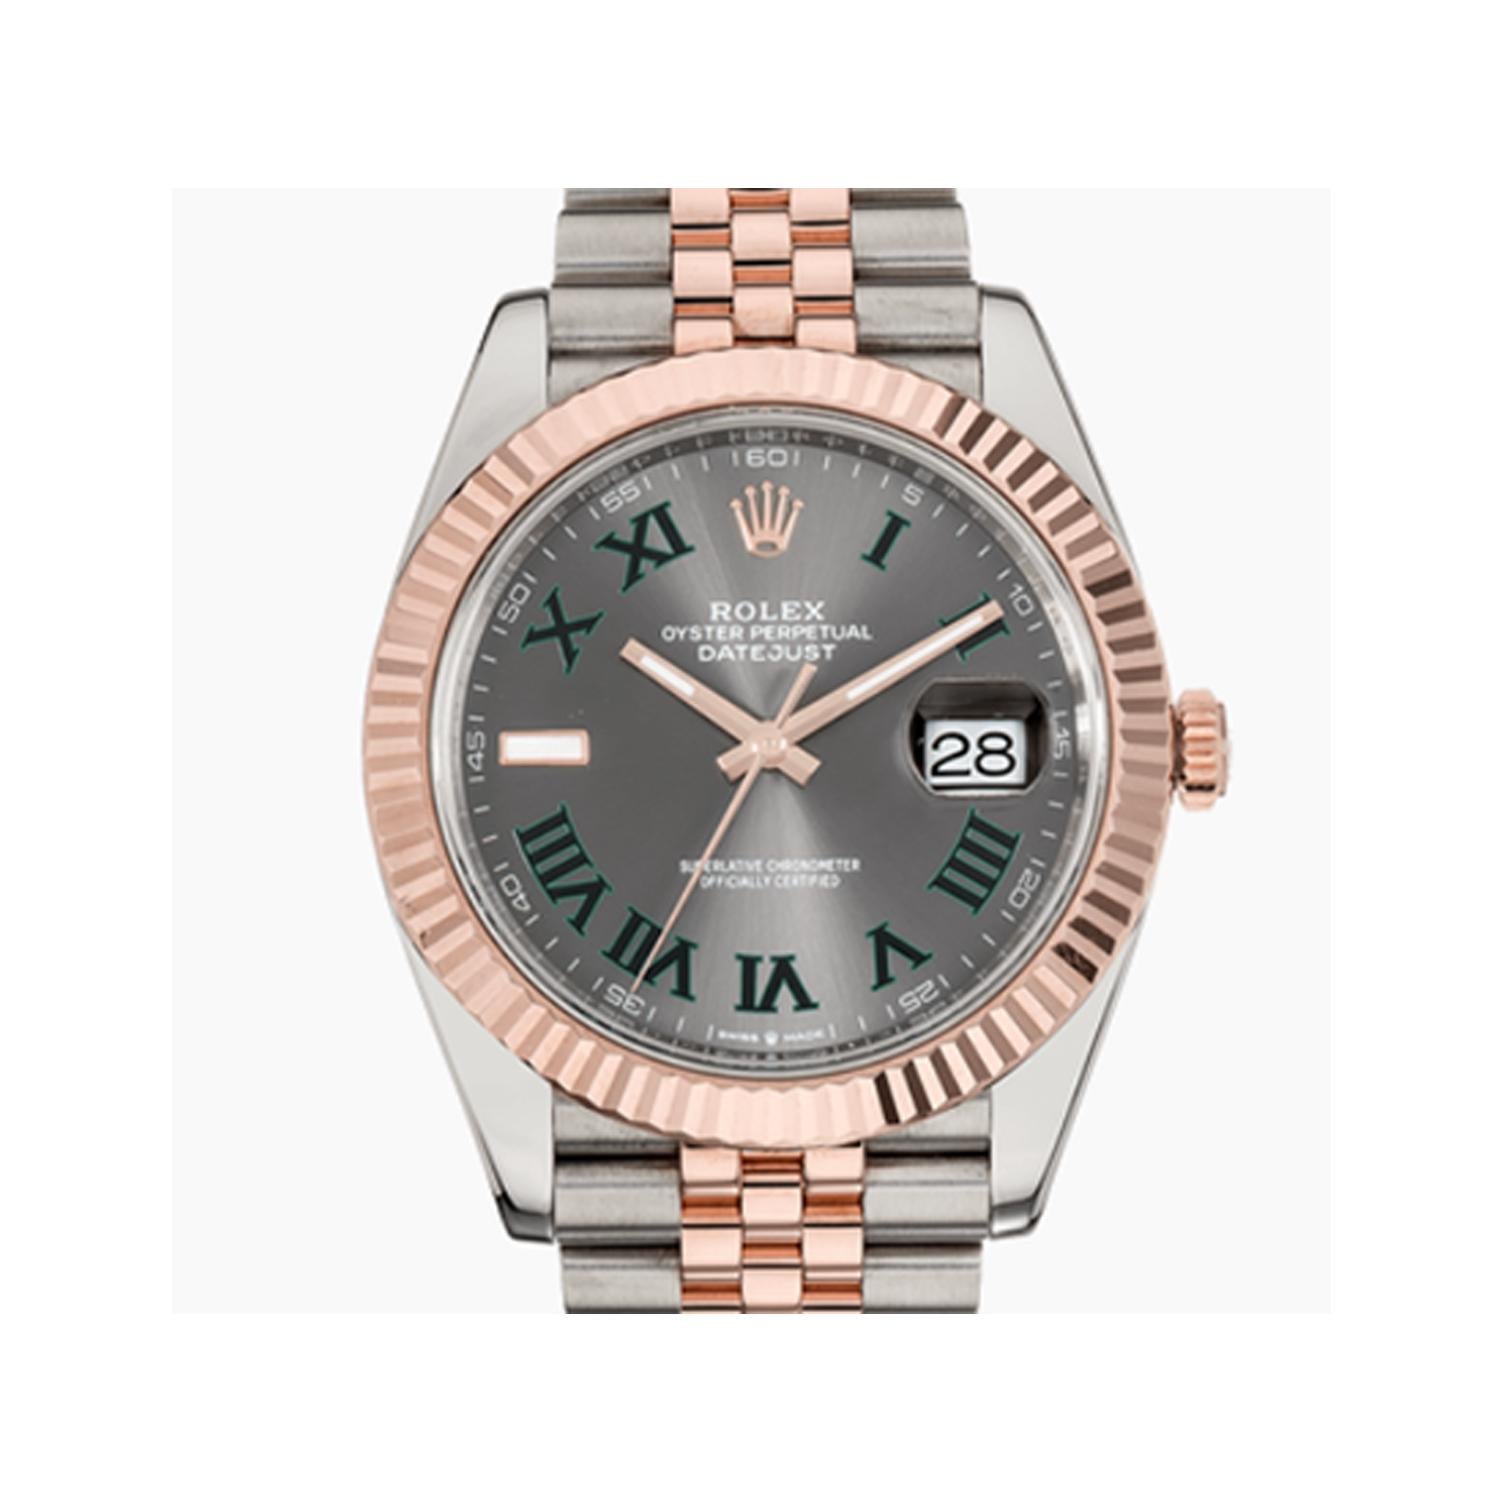 This brand new Rolex Datejust 41  126300 is a beautiful men's timepiece that is powered by a mechanical (automatic) movement which is cased in a stainless steel case. It has a round shape face, date indicator dial, and has hand roman numerals style